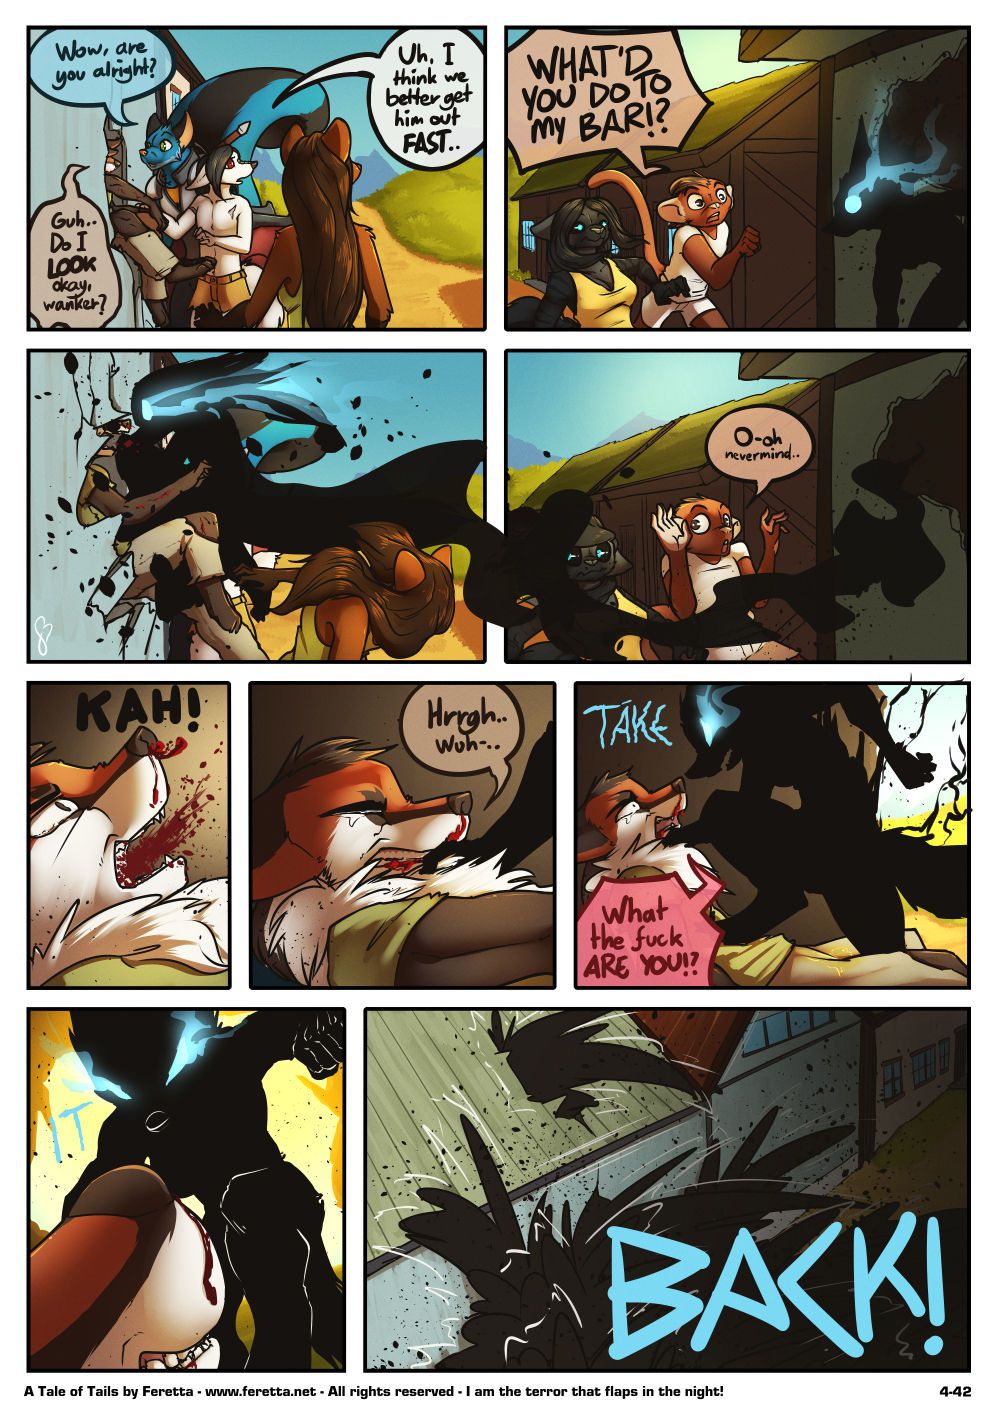 [Feretta] A Tale of Tails: Chapter 4 -  Matters of the mind [Ongoing] 42